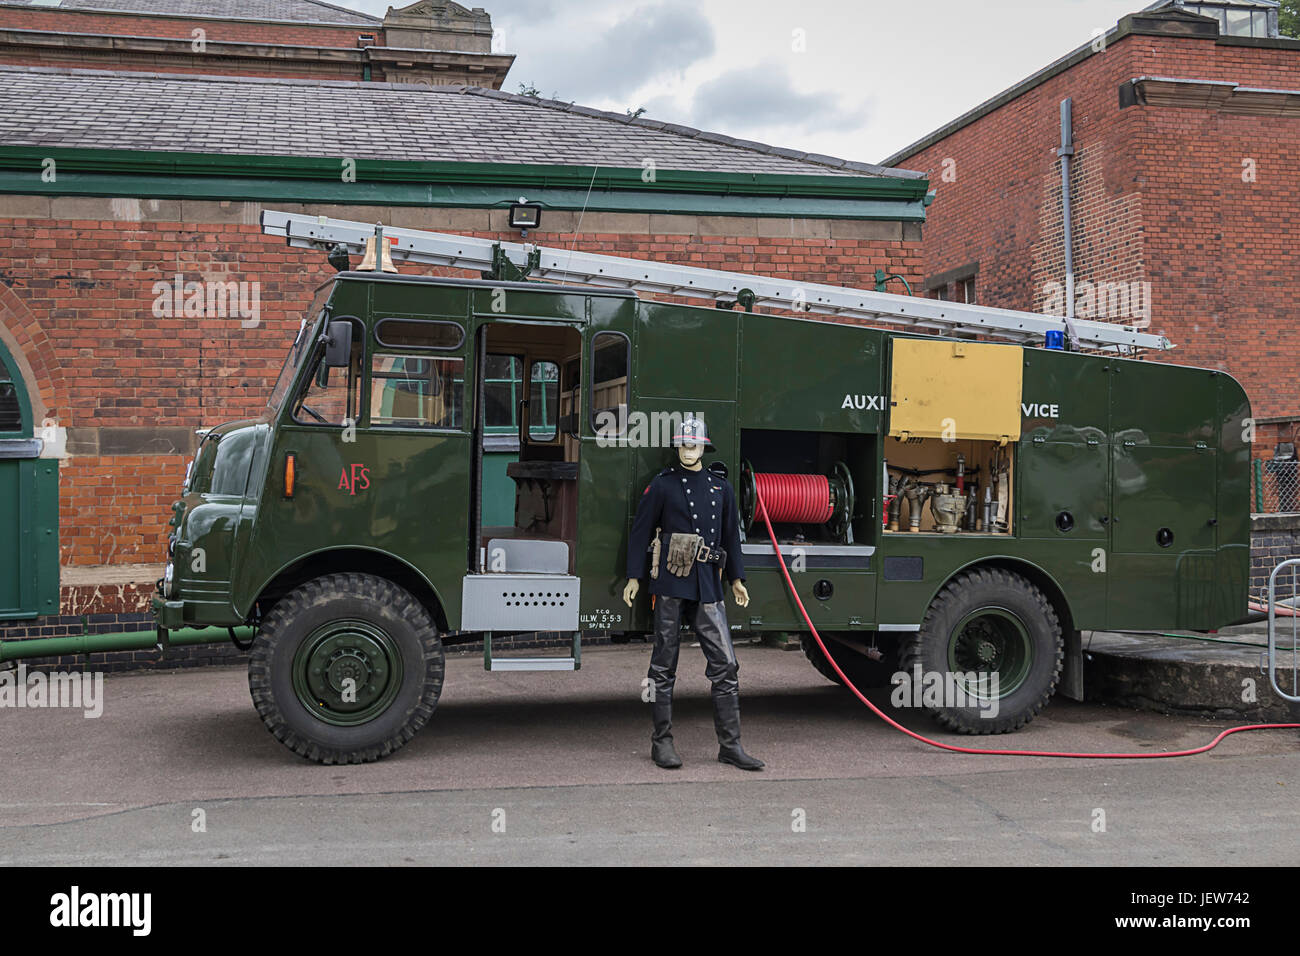 The Green Goddess British Armed Forces Fire Truck Pictured At The Vintage Fair Held At Abbey Pumping Station On The 25th June 2017. Stock Photo